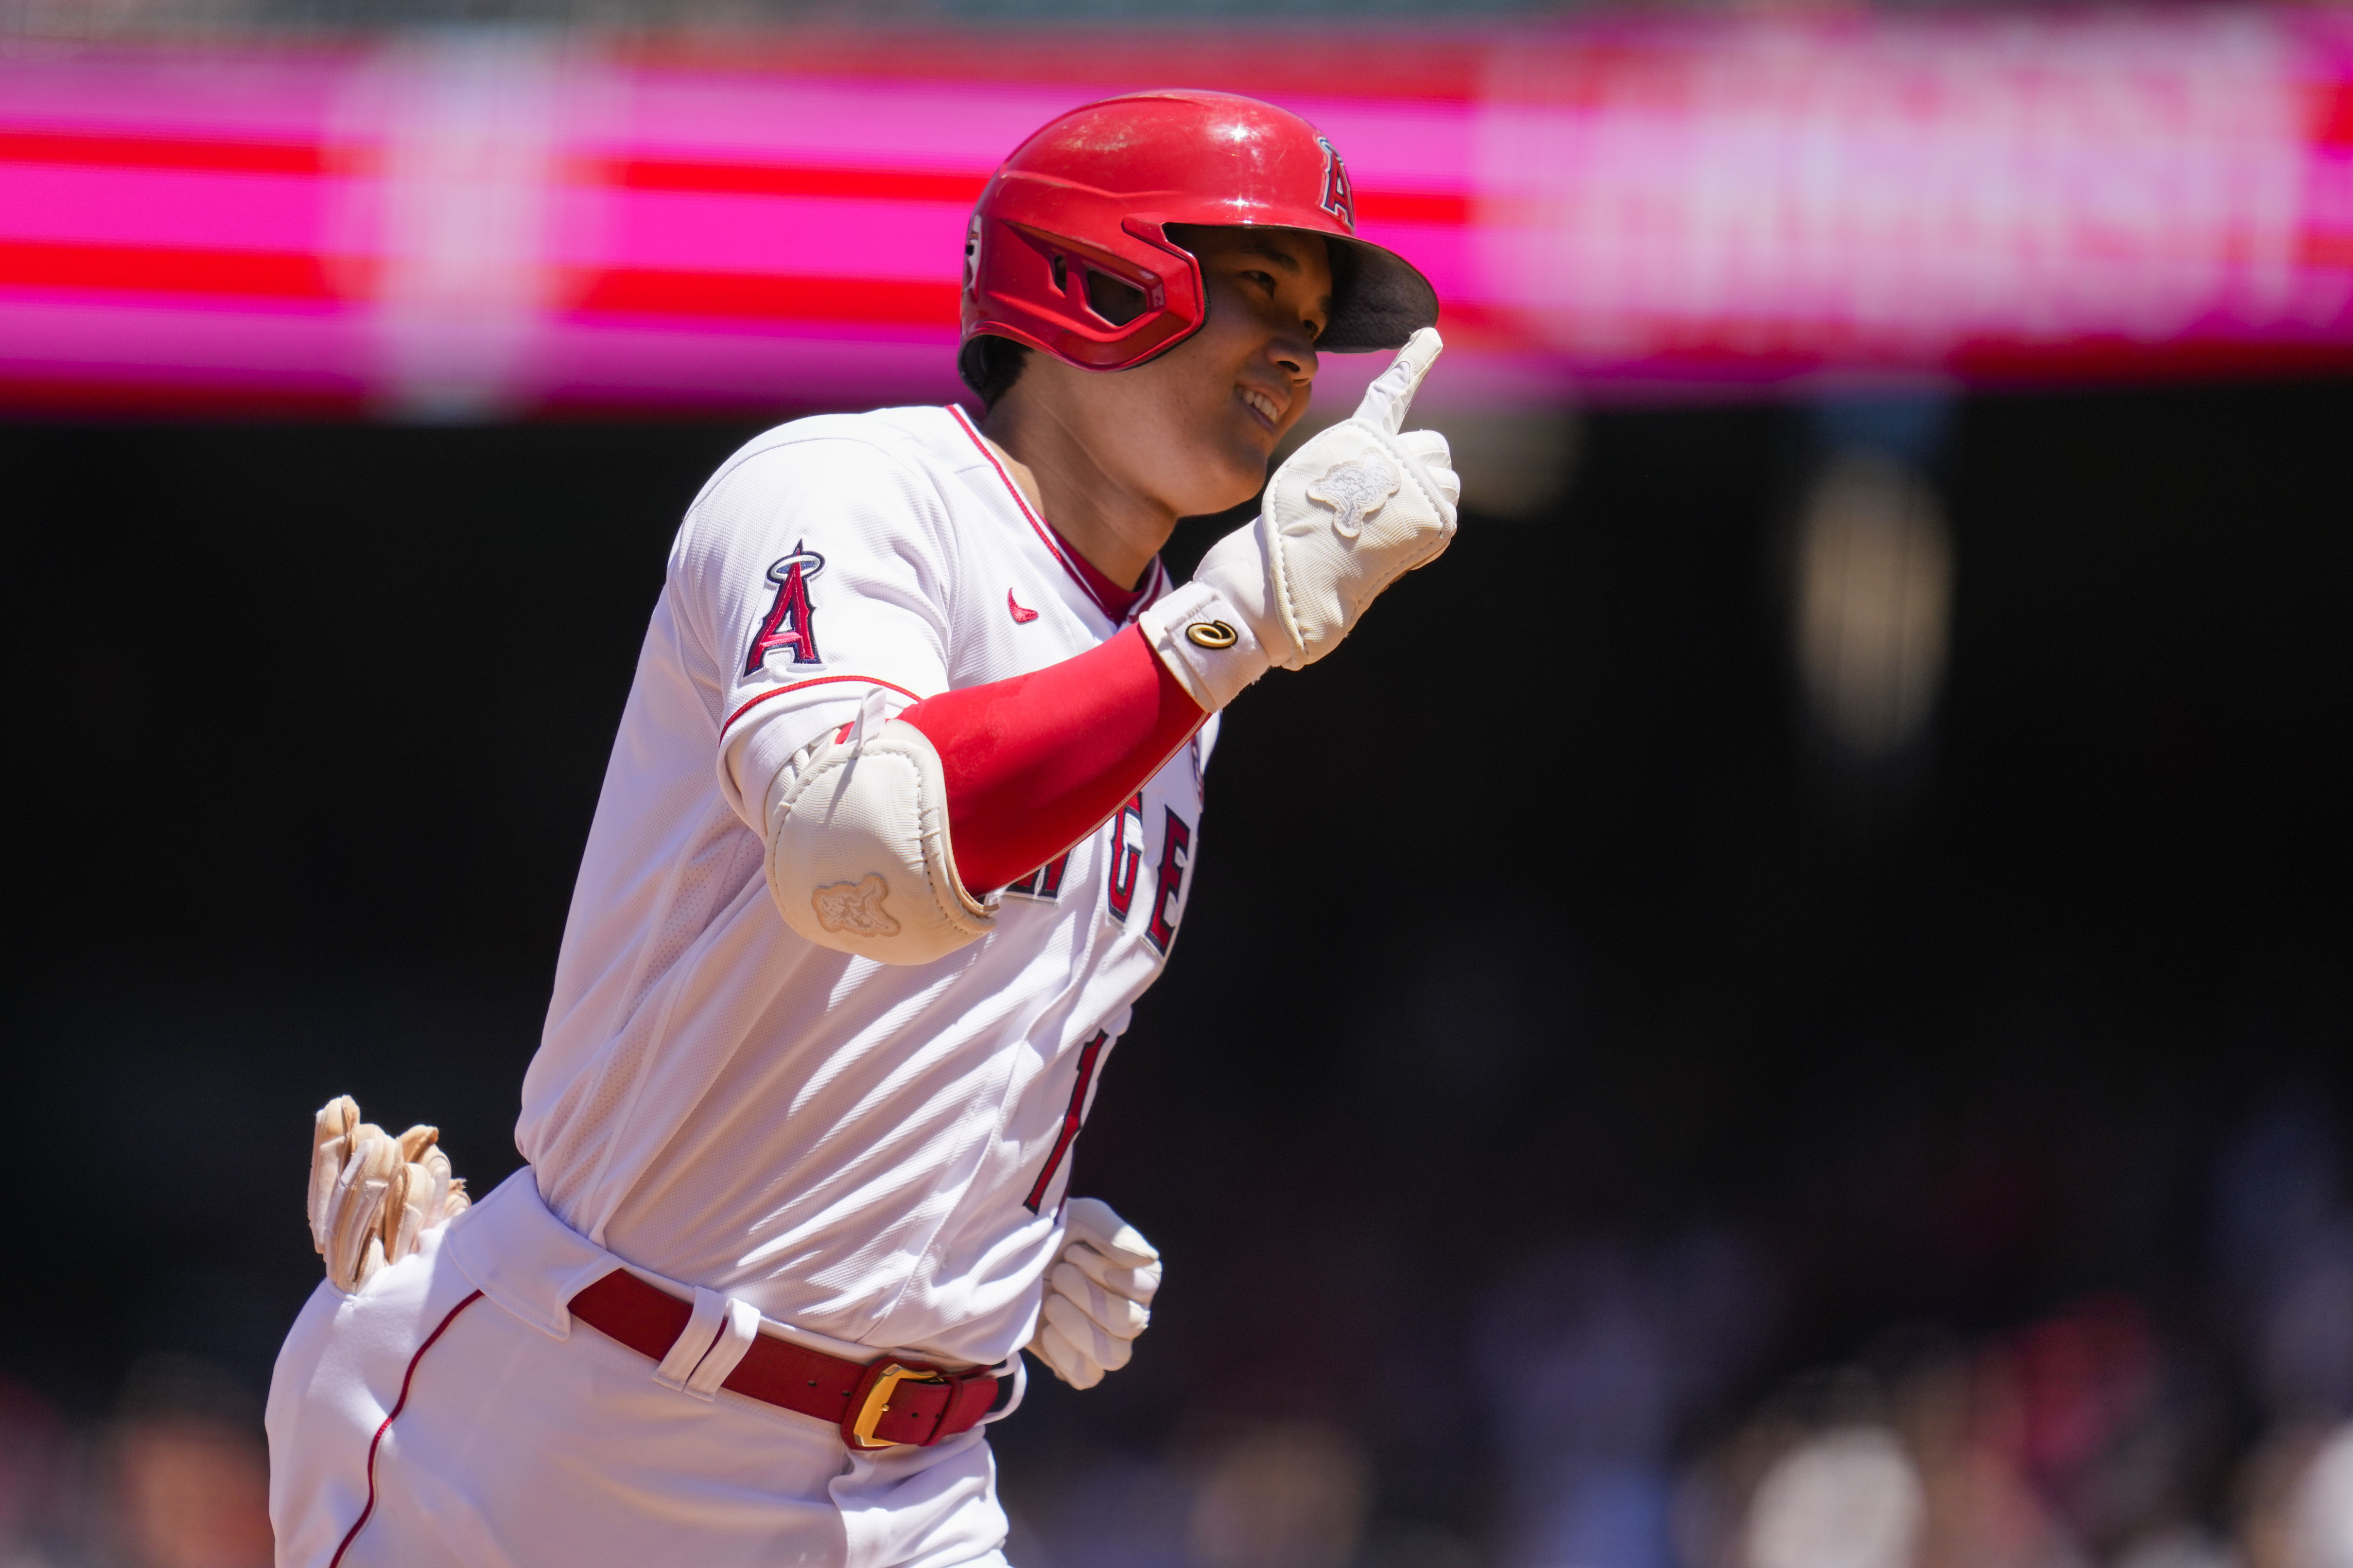 Shohei Ohtani earns win with perfect inning in two-way All-Star